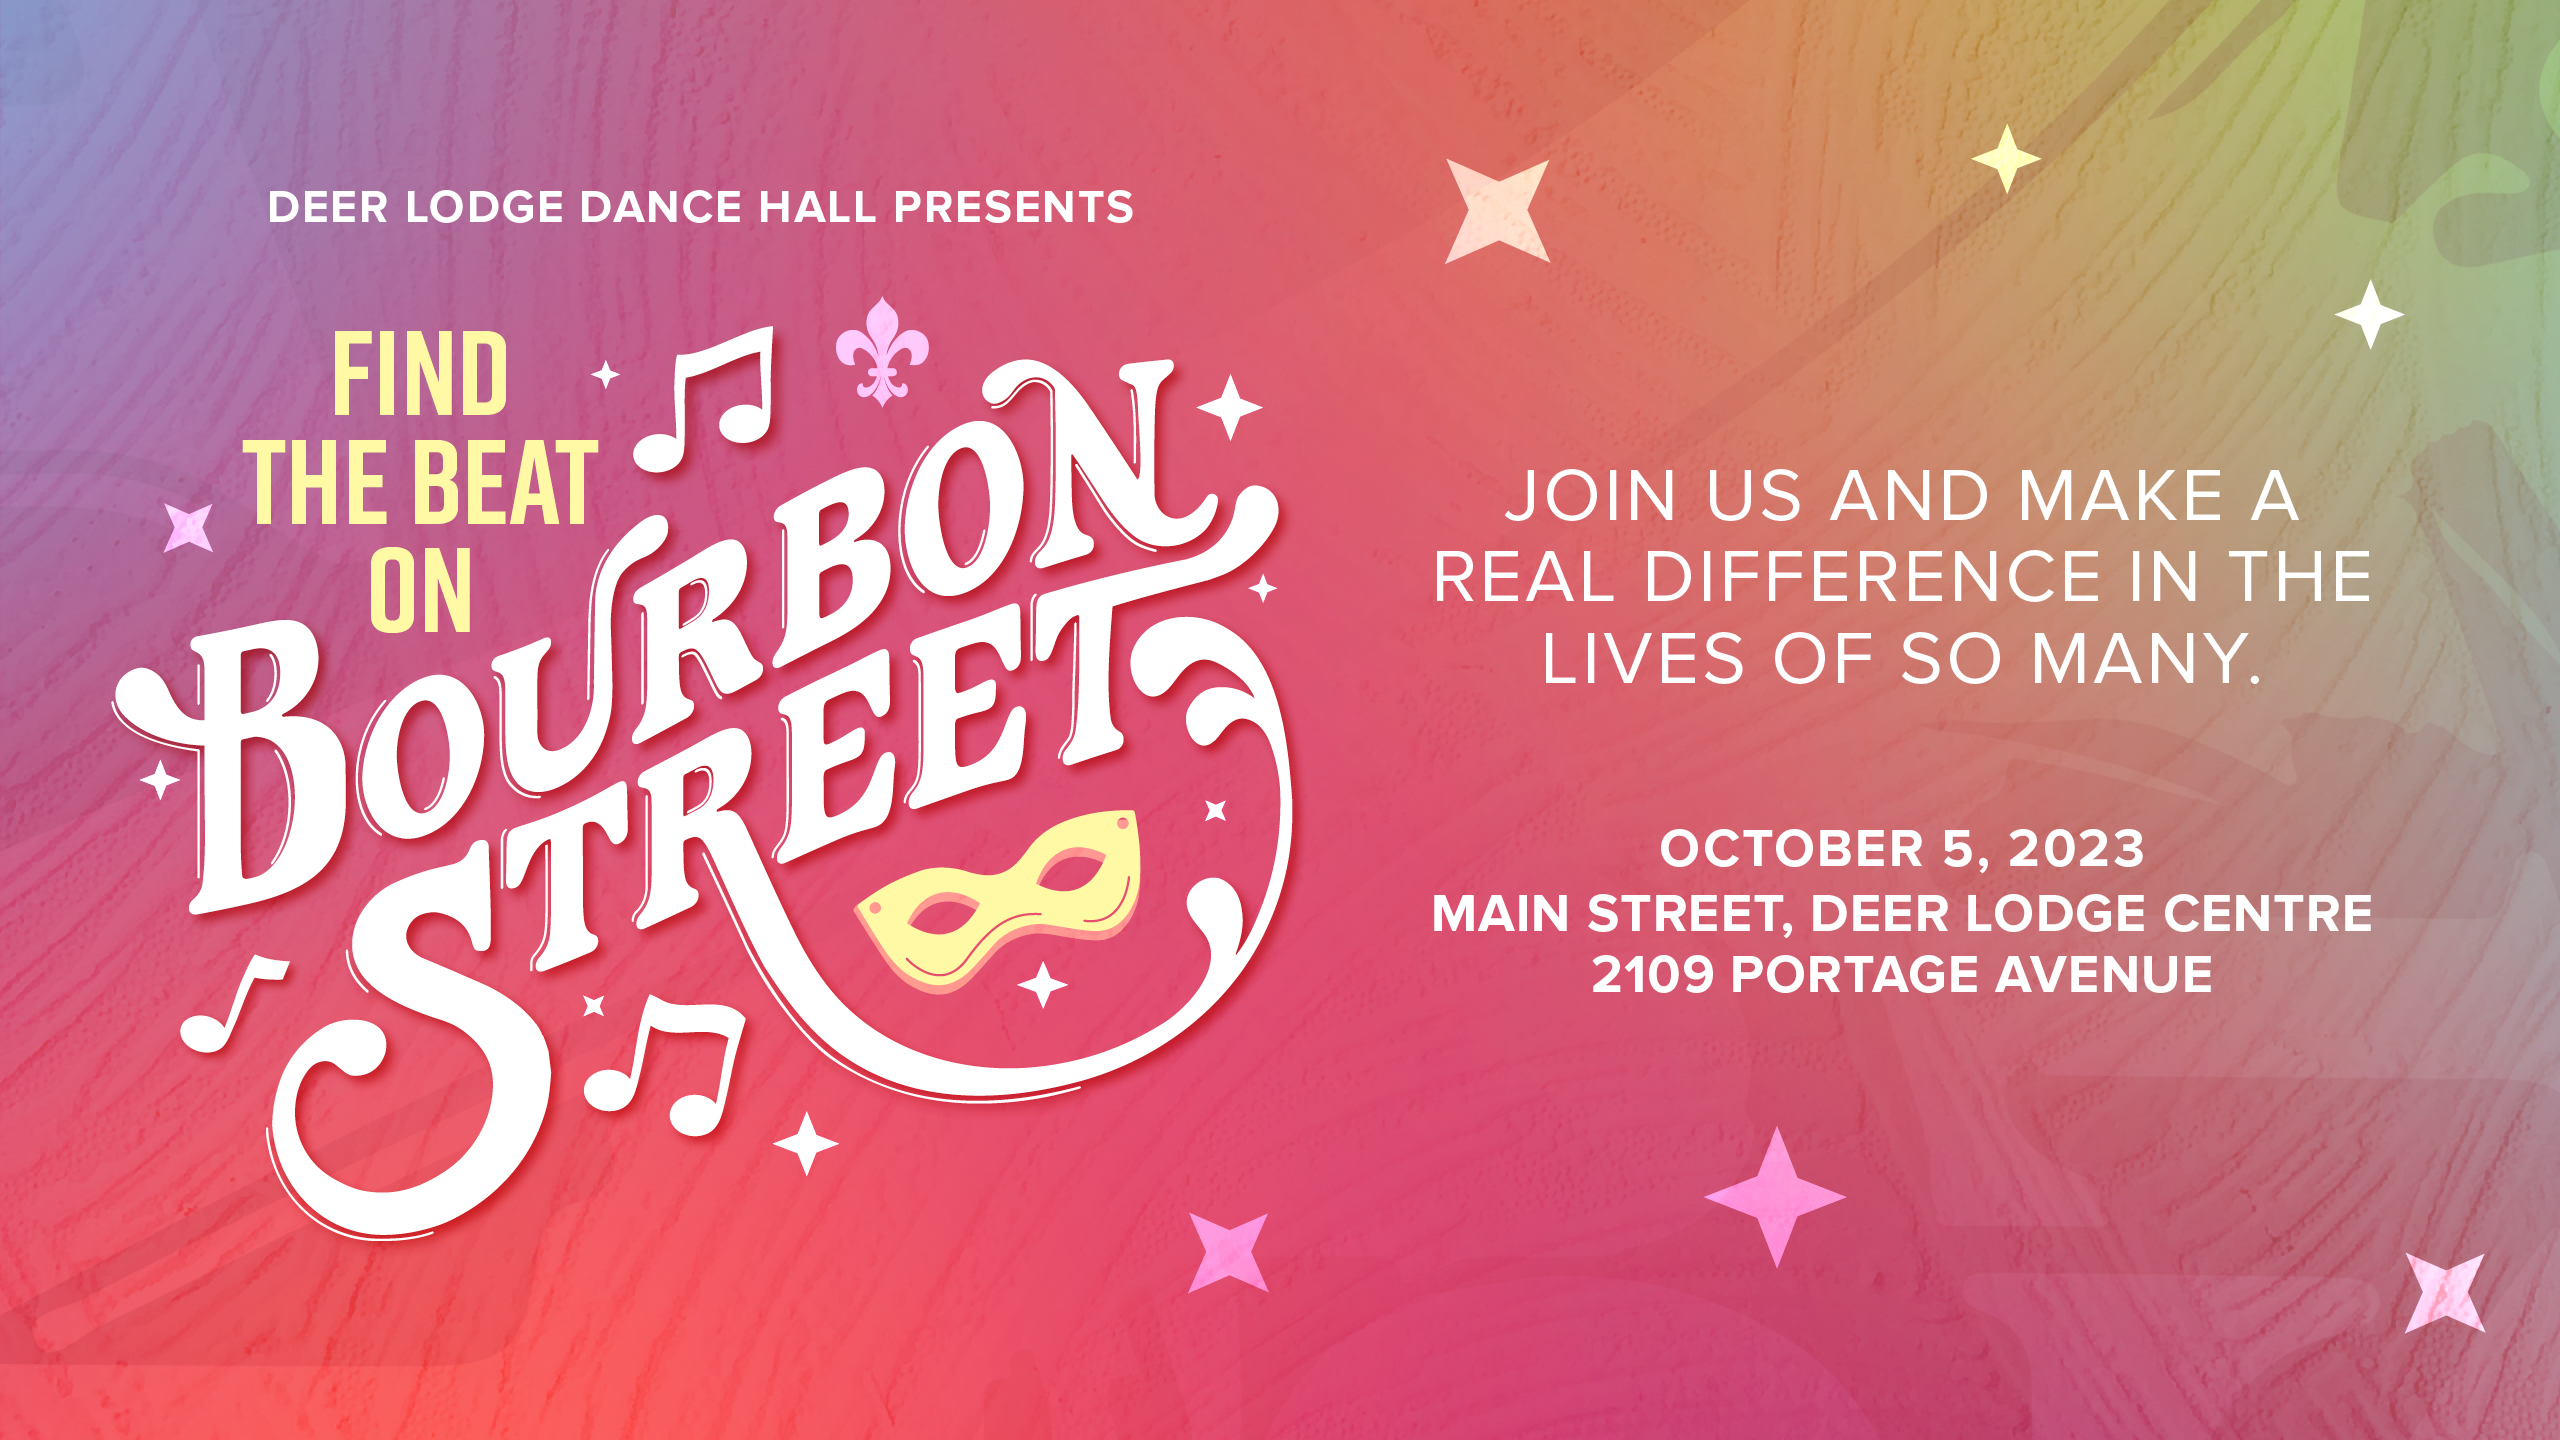 Featured image for “Deer Lodge Dance Hall Presents: Find The Beat On Bourbon Street”